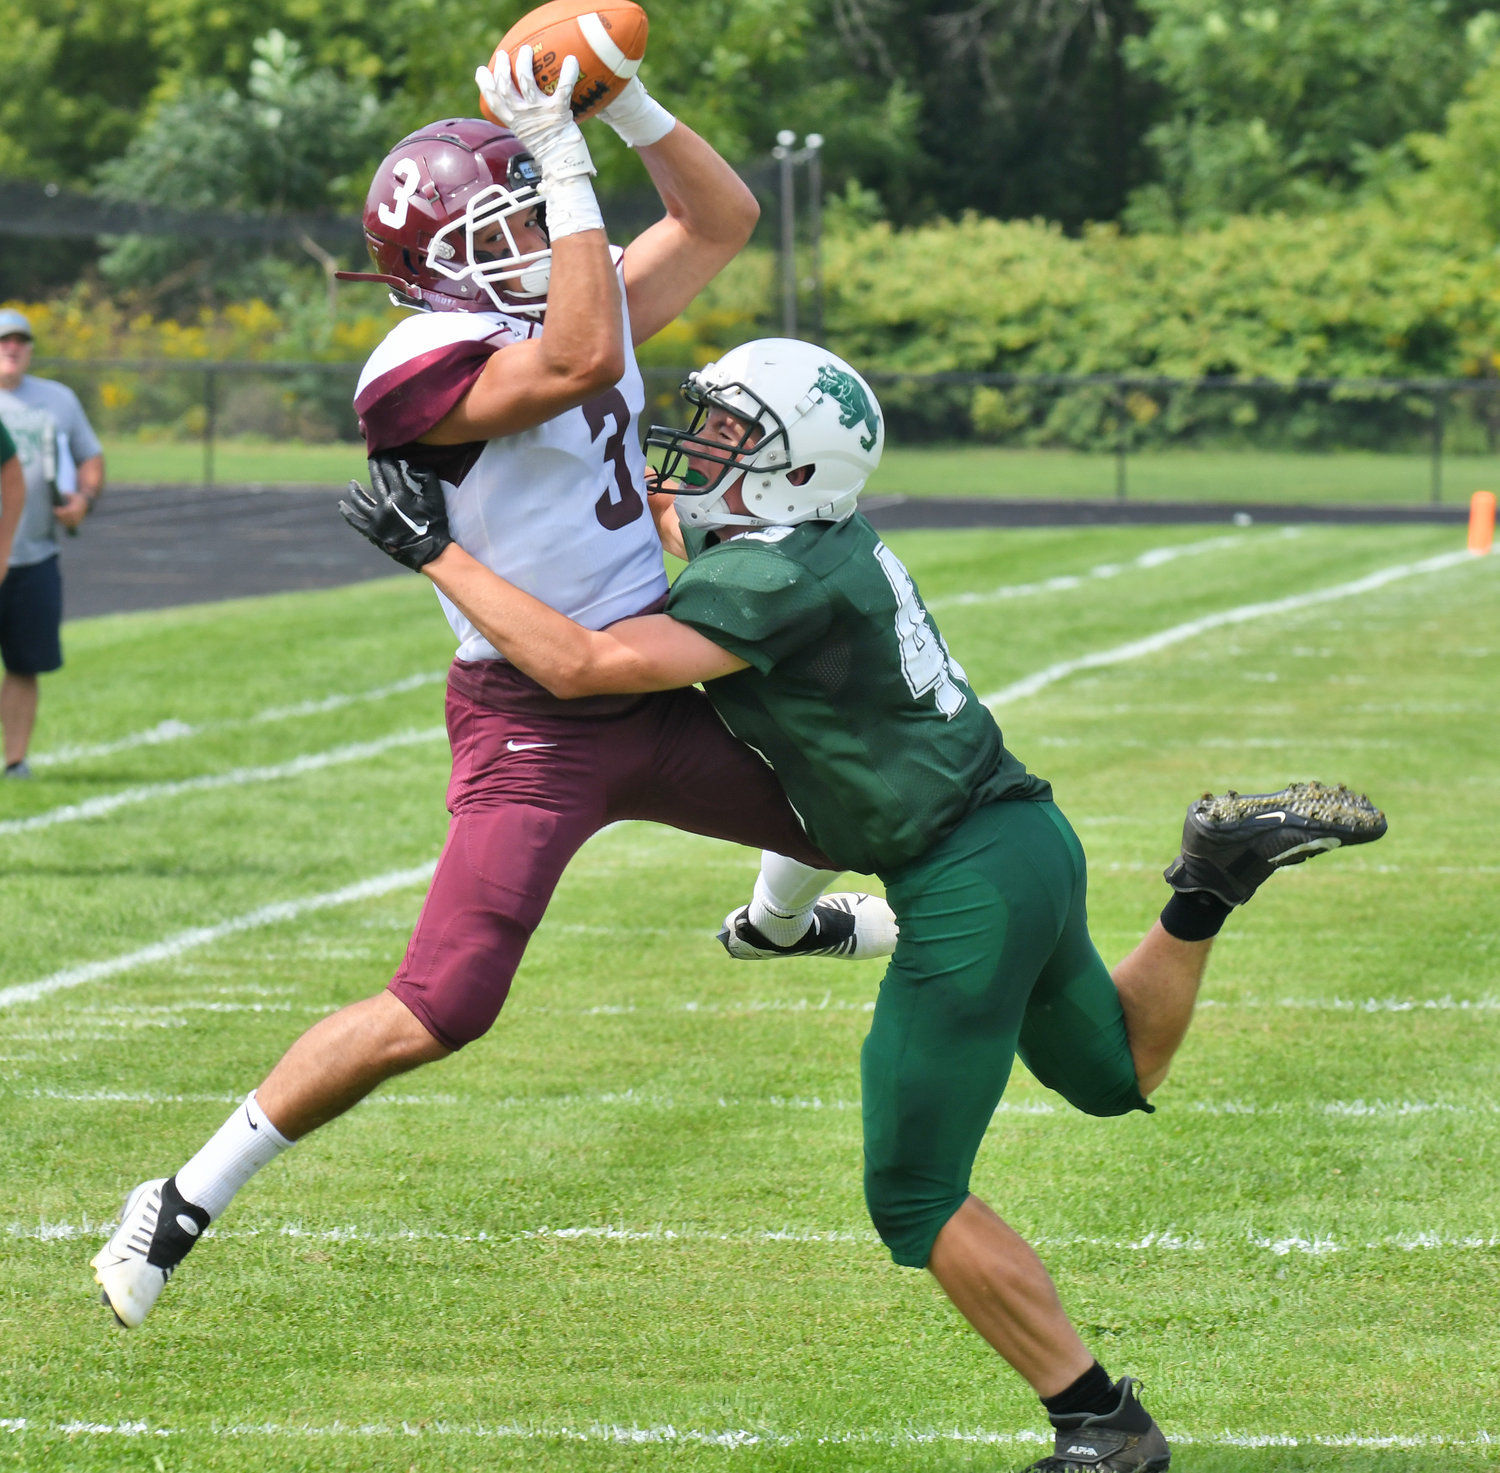 Clinton's Cameron Maline catches the ball with Westmoreland/Oriskany's Jack Williams defending in the first half during Saturday afternoon's non-league game in Westmoreland. The Warriors won 28-6.